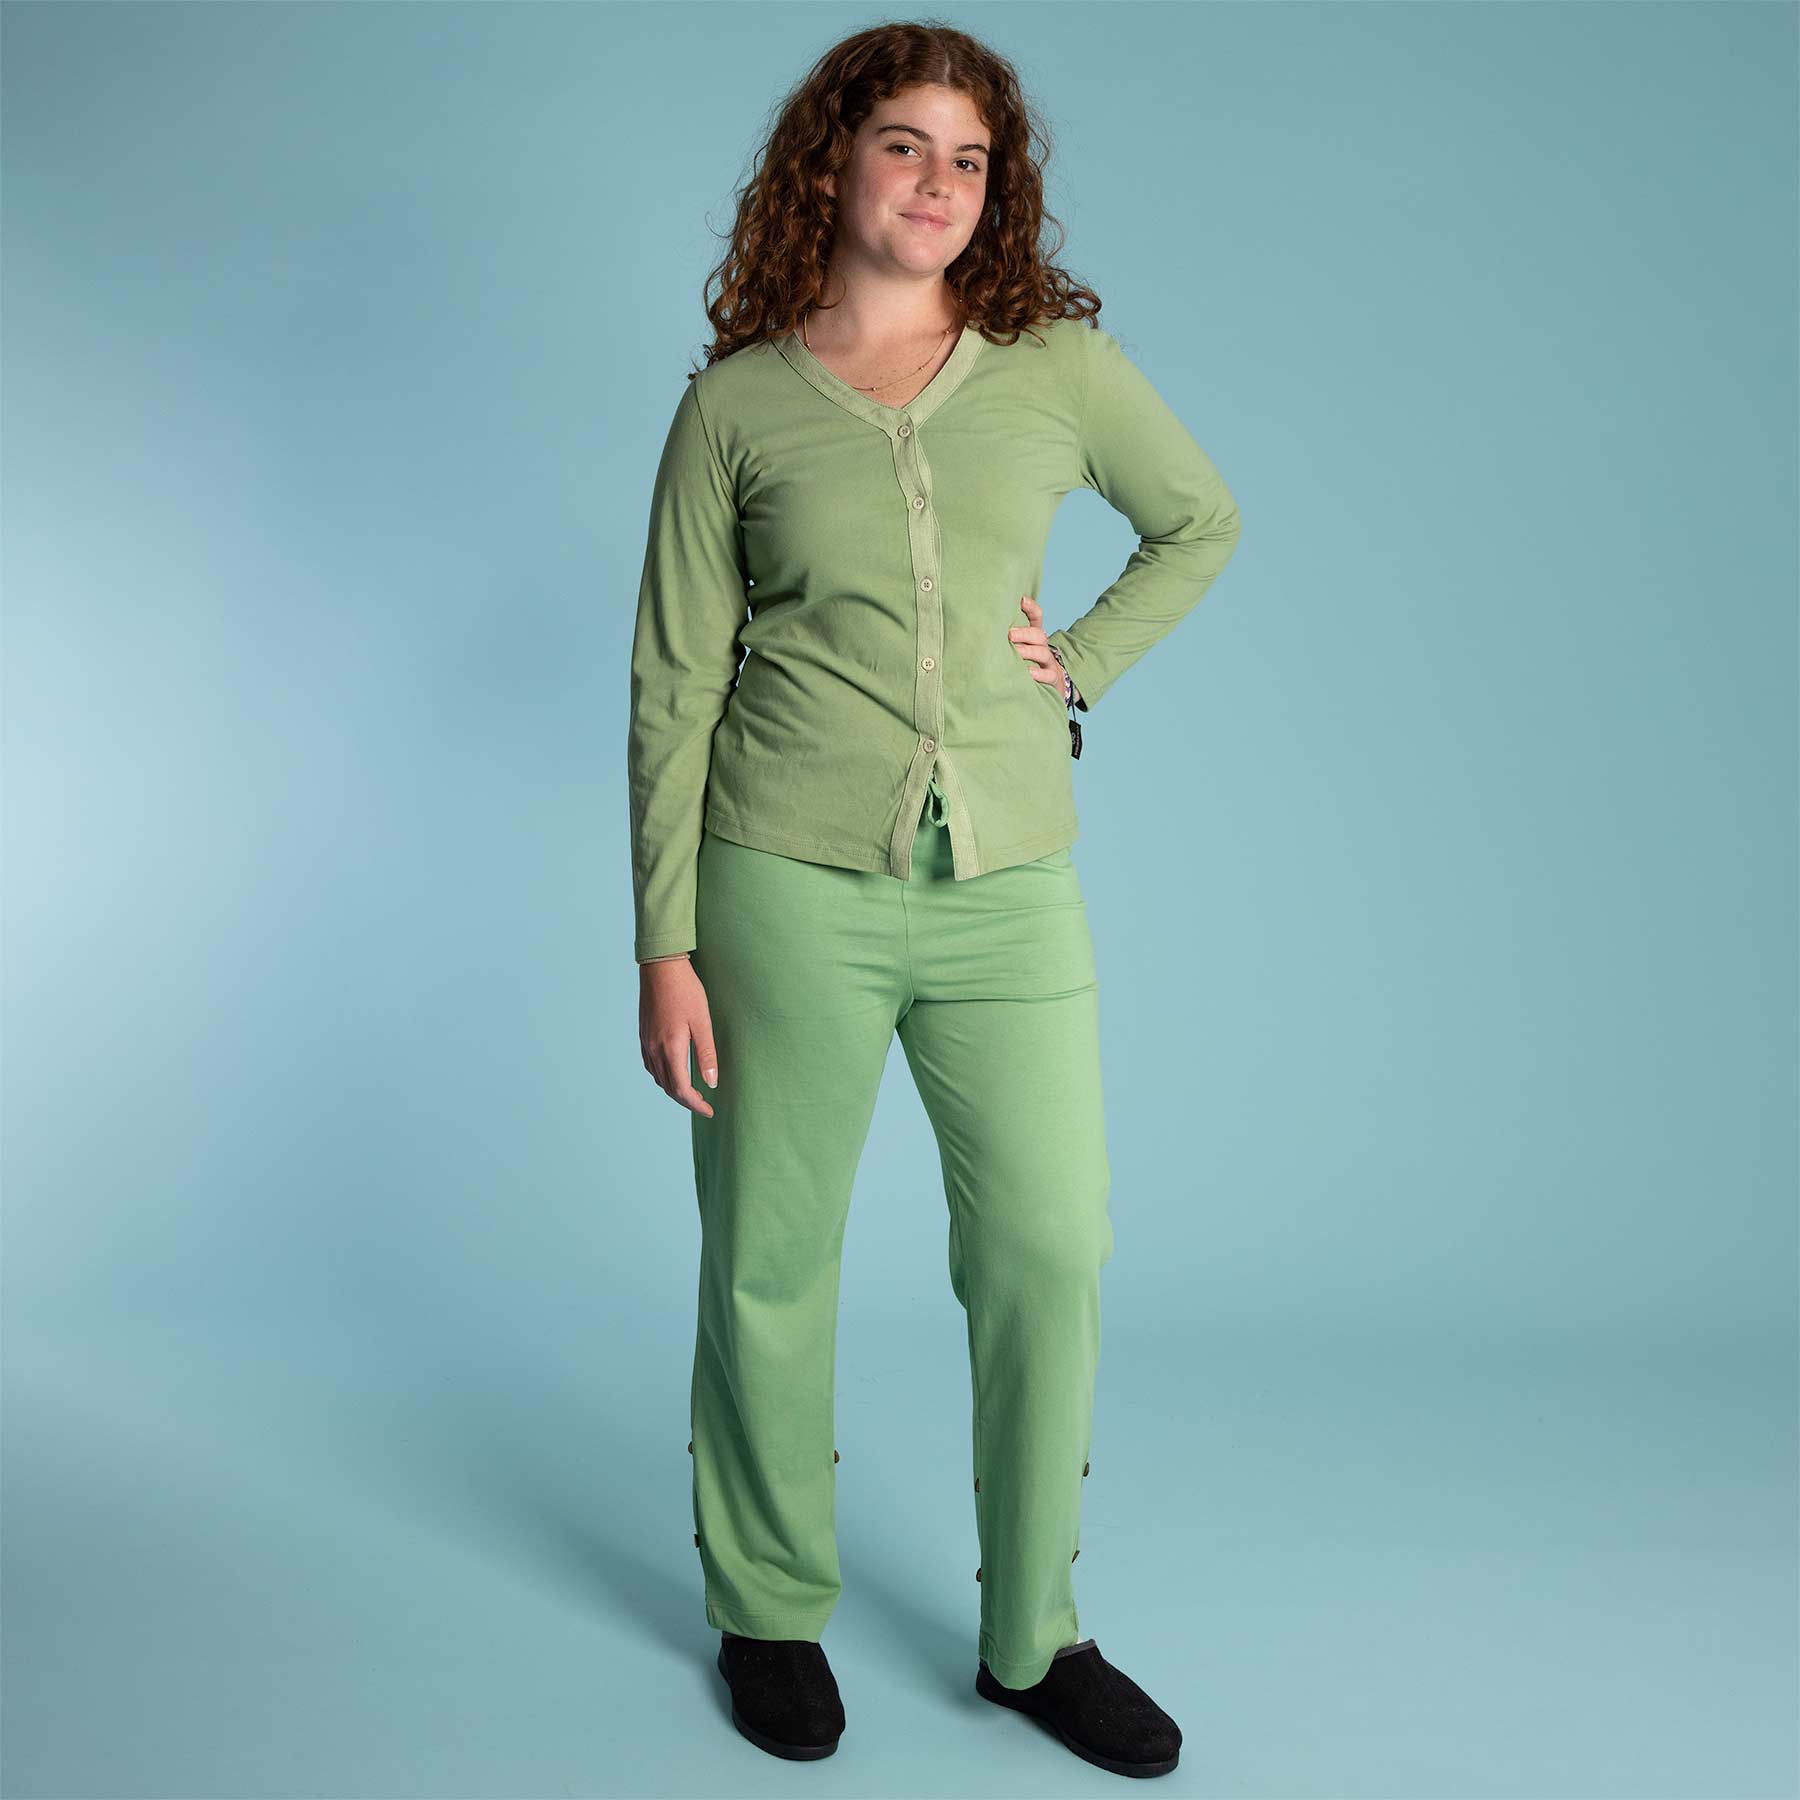 Eco friendly 100% Organic Cotton Knit Jersey Pajamas Set by Rawganique  since 1997